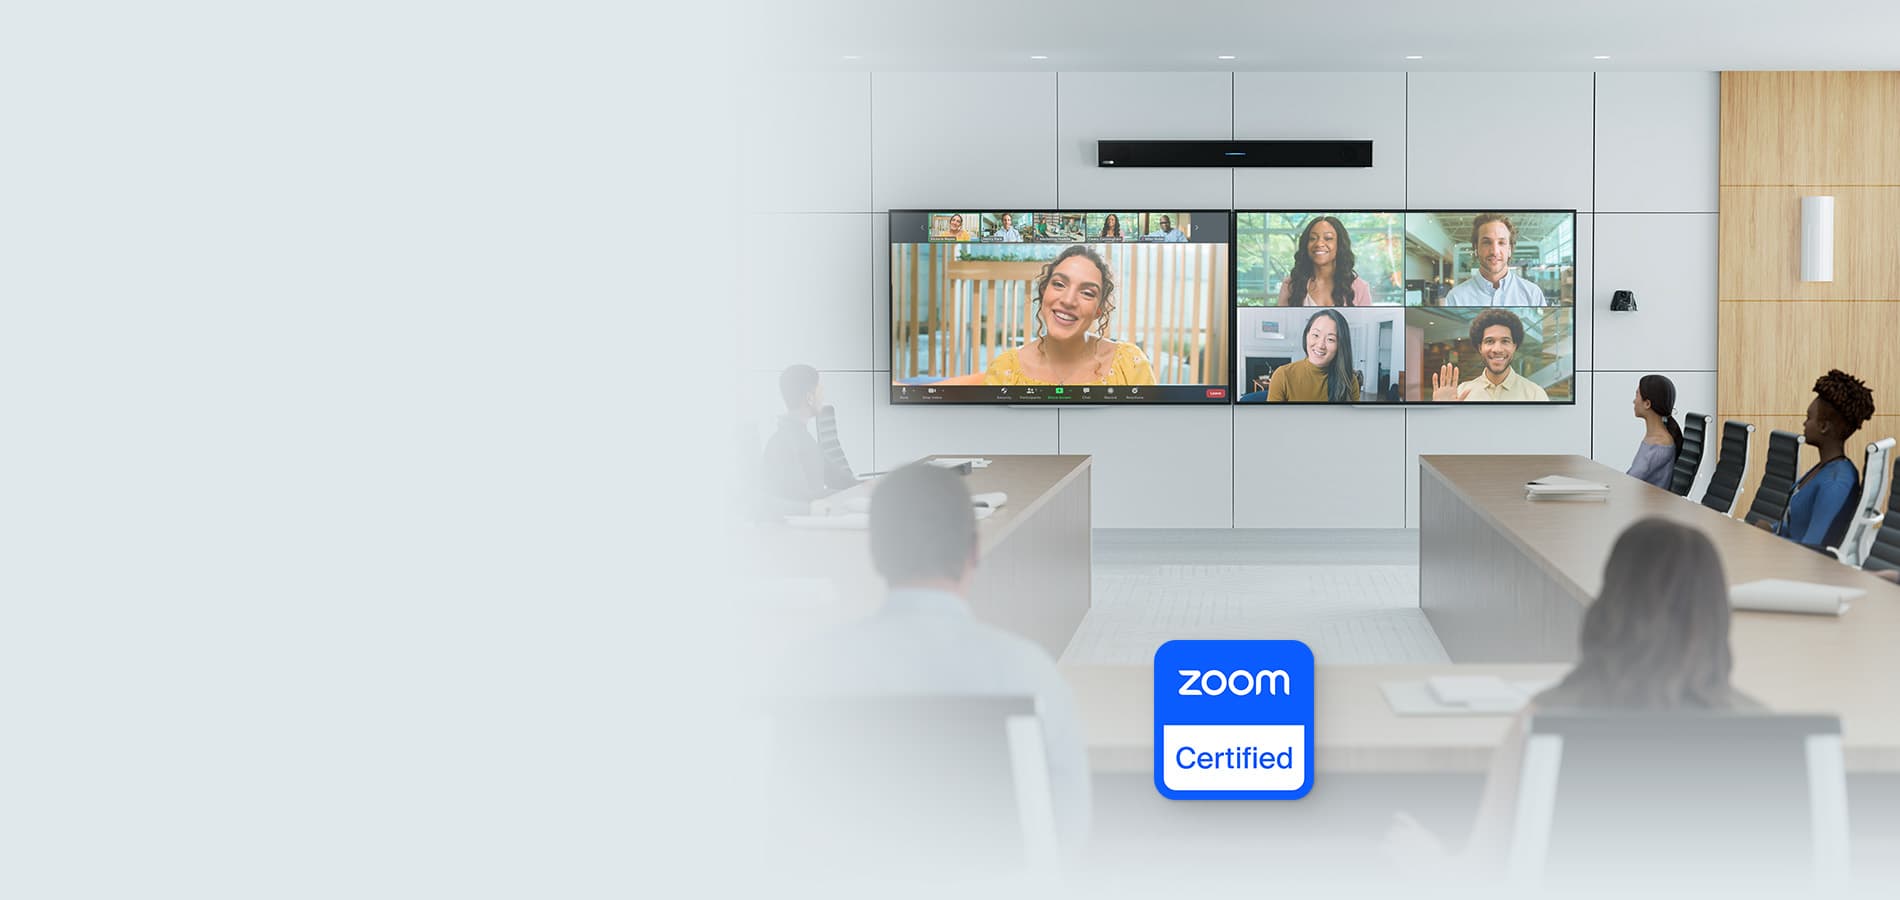 Easy Zoom-certified audio for all your large meeting rooms and classrooms